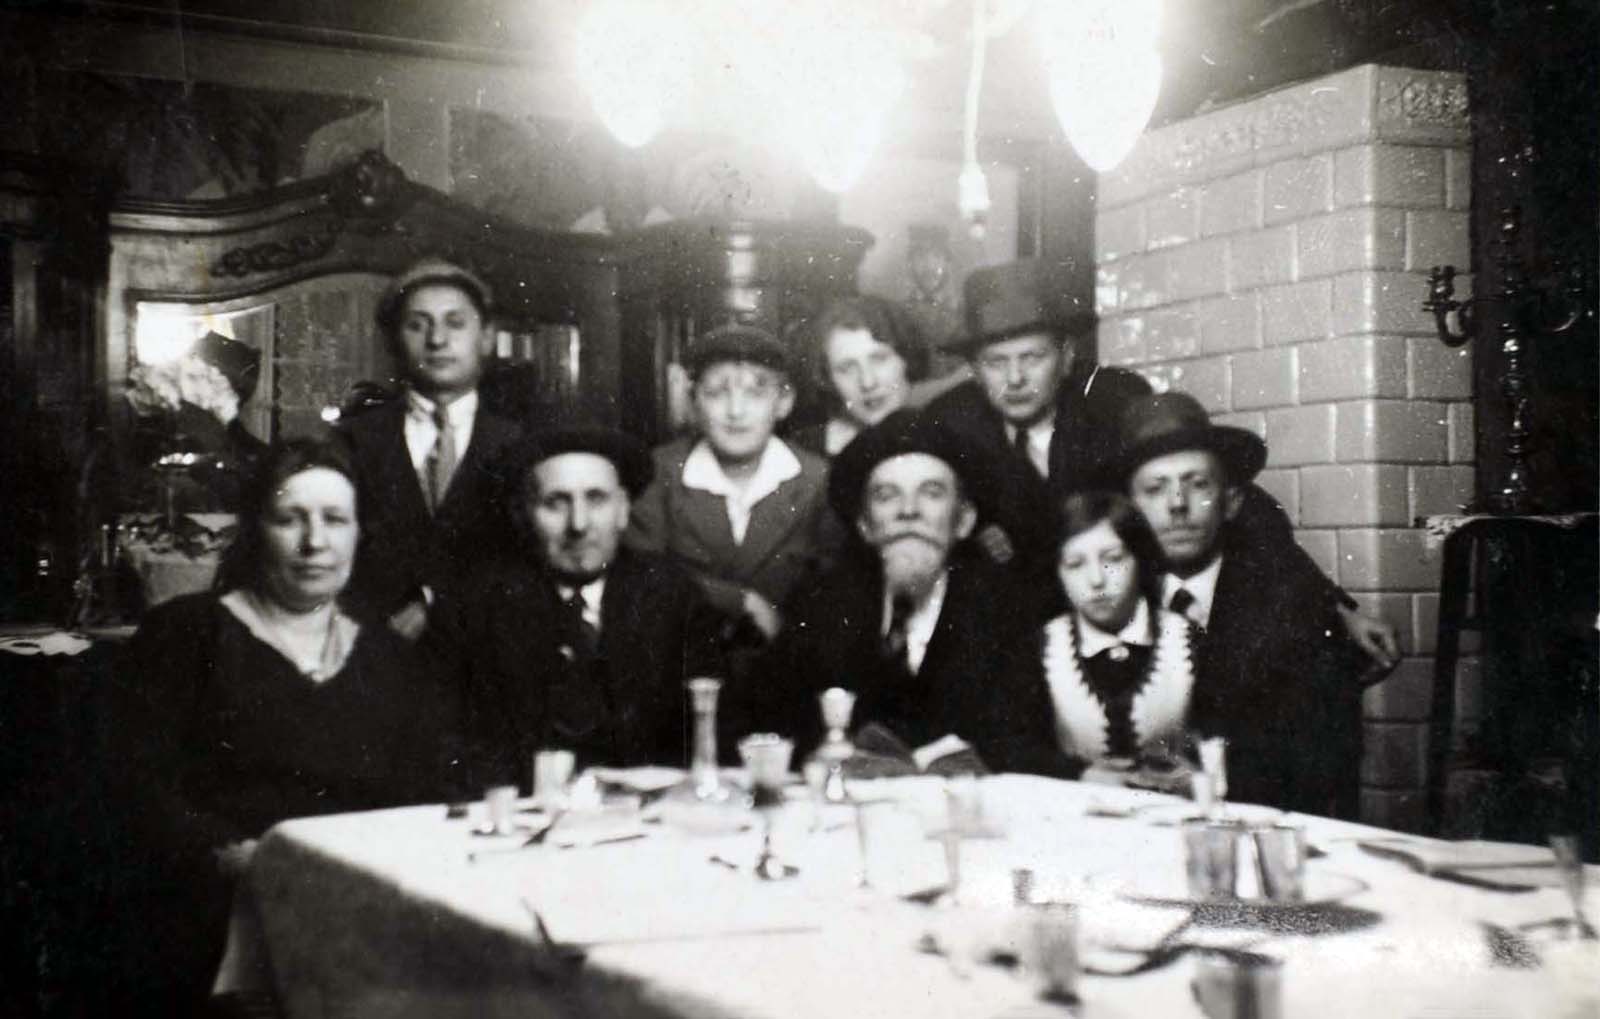 Warsaw, Poland, Buchalter family (family of the submitter), during the Passover Seder, 1933 